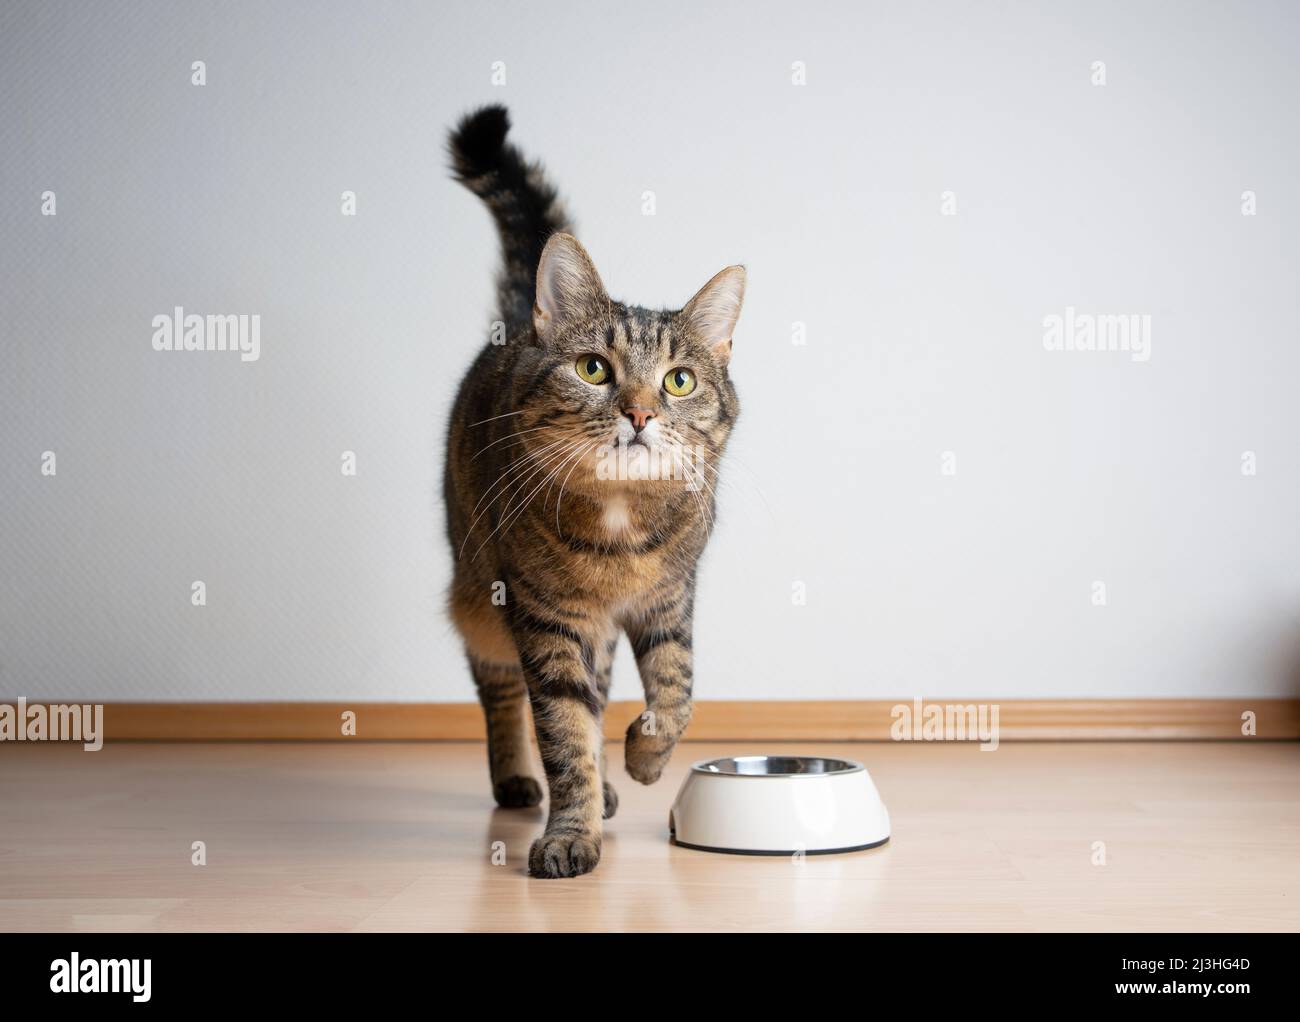 hungry tabby cat next to empty feeding bowl waiting for pet food with copy space Stock Photo